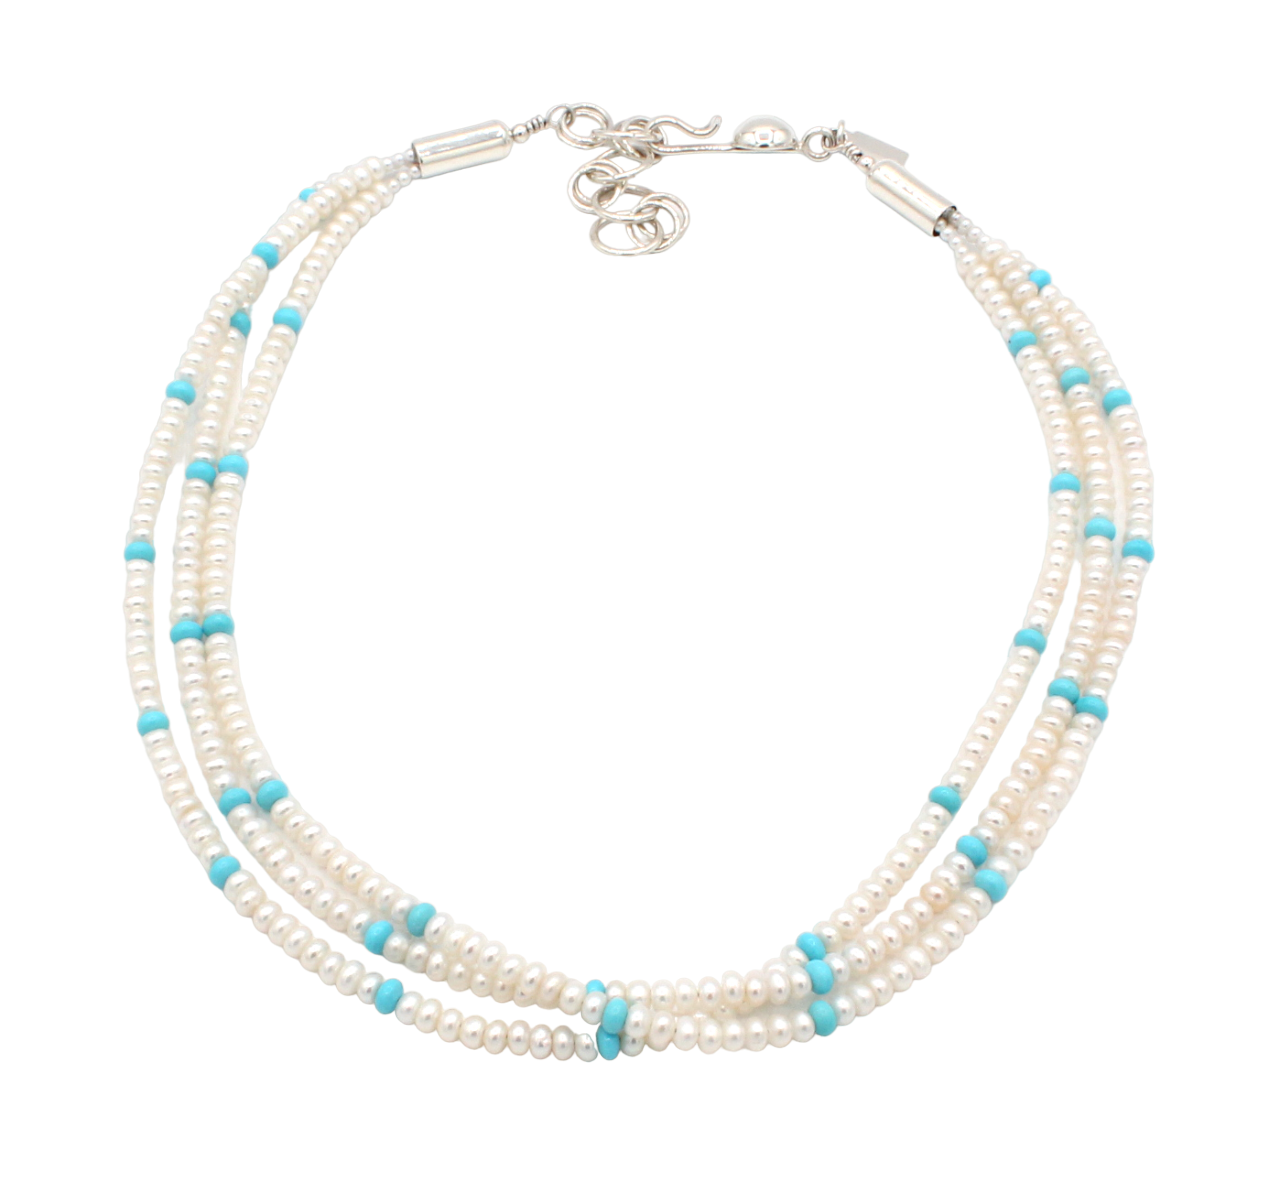 3 Strand Pearl and Turquoise Bead Necklace-Jewelry-Artie Yellowhorse-Sorrel Sky Gallery